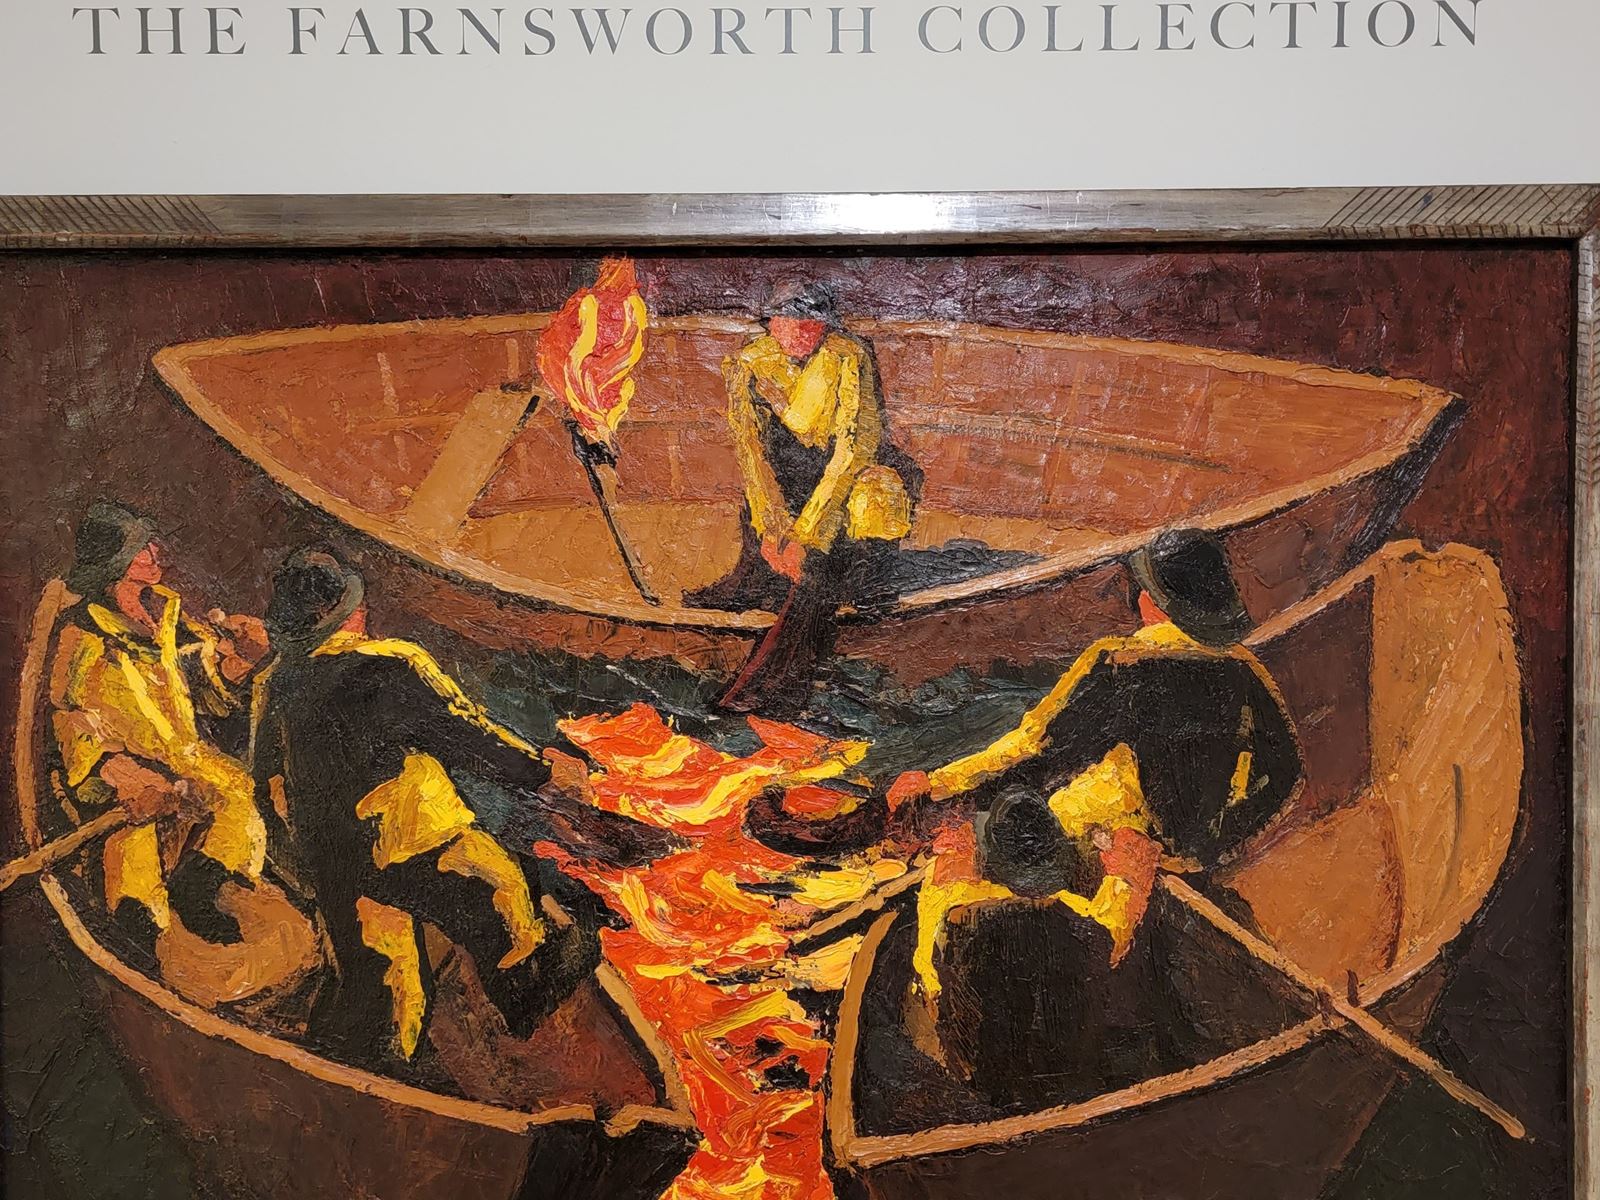 A Day at the Farnsworth Museum